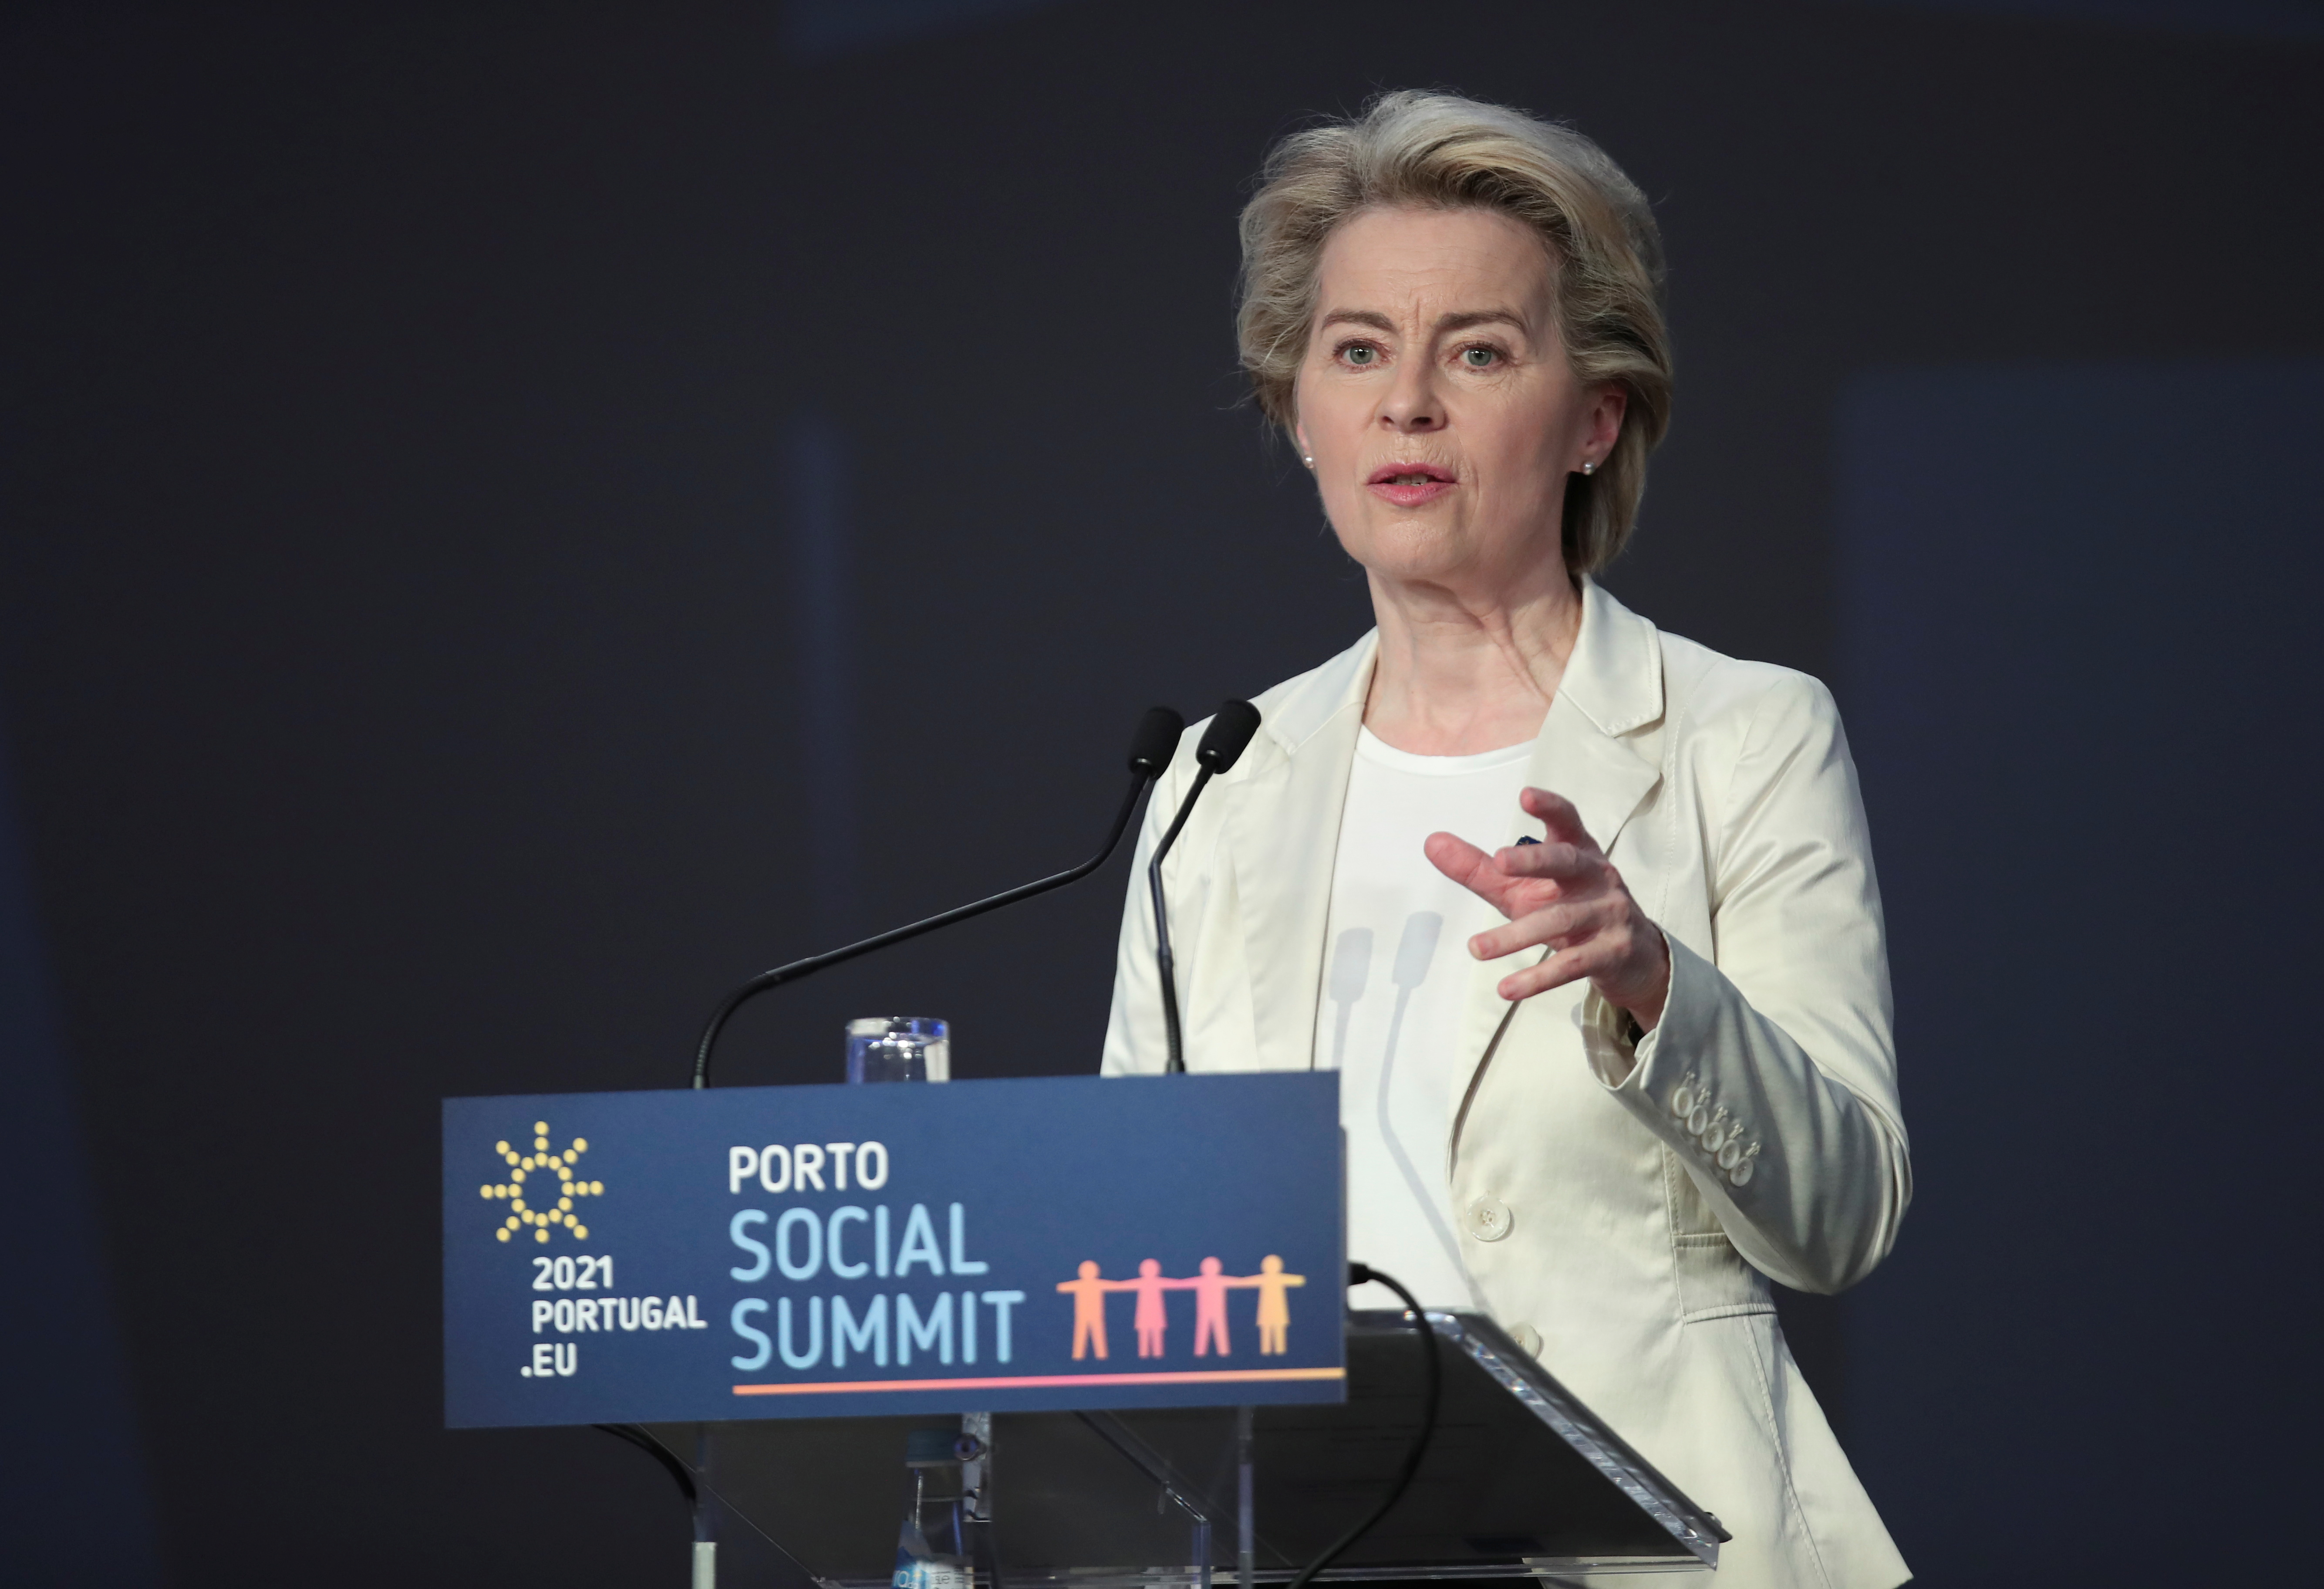 EU leaders meet to pledge commitment to social issues in post-pandemic world